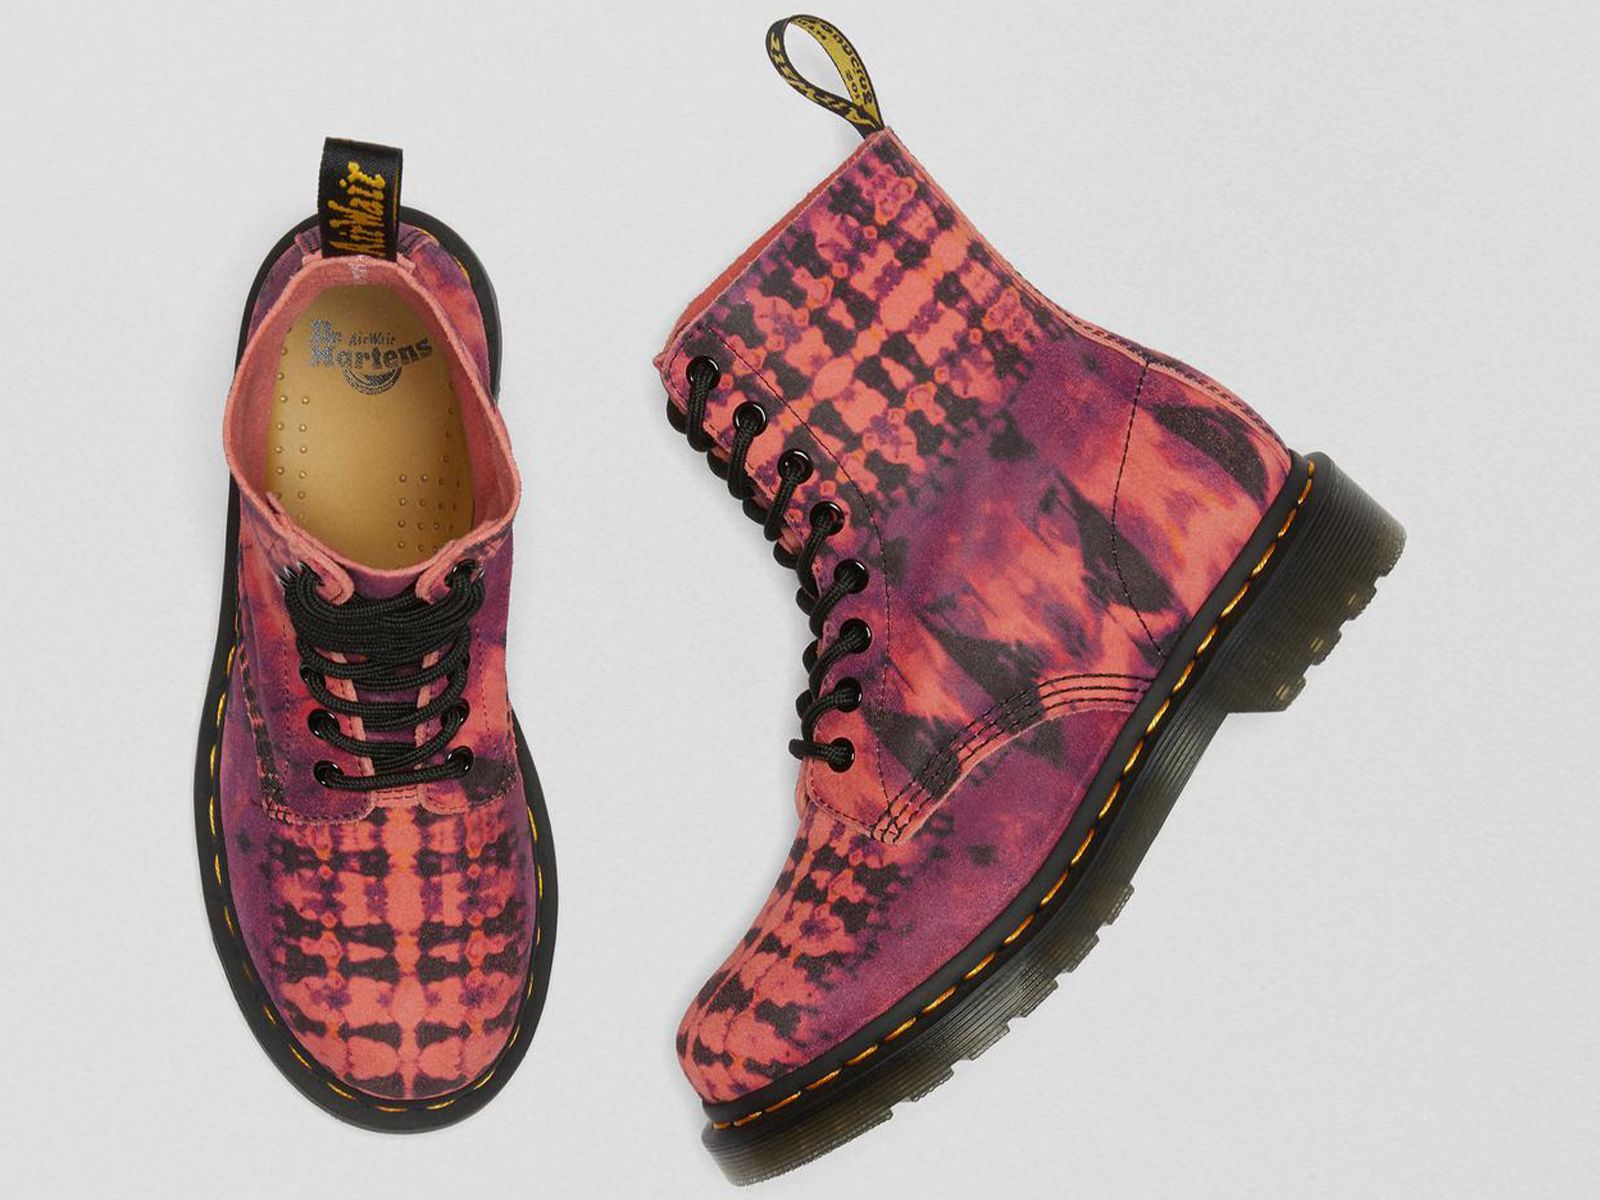 Dr. Martens joins the Tie Dye trend with its 1460 boots